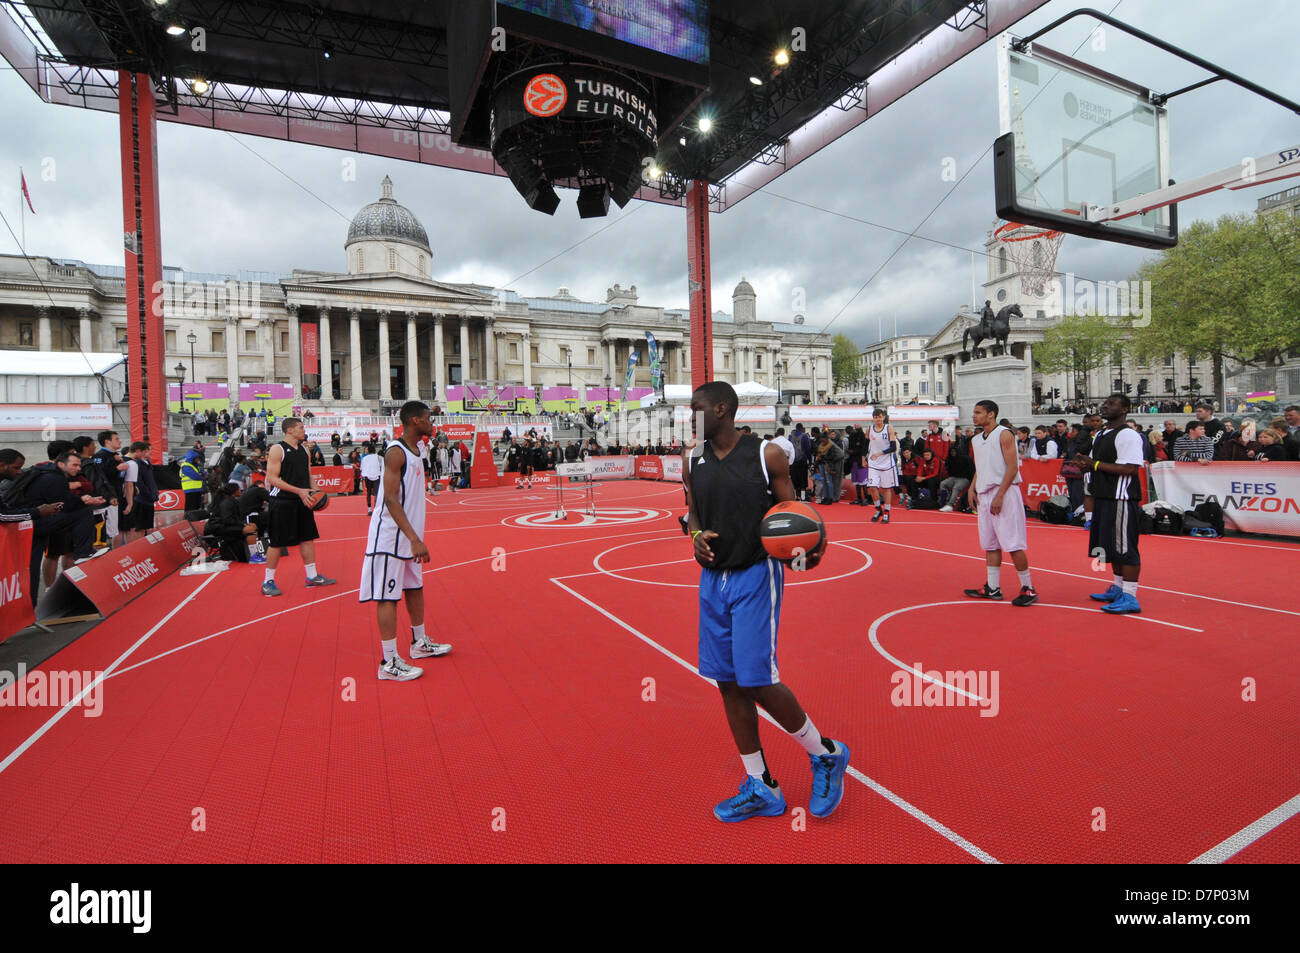 Trafalgar Square, London, UK. 11th May 2013. Players on the baskeball court in the centre of Trafalgar Square. The Turkish Airlines Euroleague Basketball Fan Zone fills more than 2,000 square meters of Trafalgar Square with activities throughout Final Four weekend from Friday, May 10 to Sunday, May 12. A weather-proof Main Court, two full courts complete with a 15-meter-high roof, in the middle of the square. The Turkish Airlines Main Court will be the main venue for games, contests and other activities. Credit:Matthew Chattle/Alamy Stock Photo